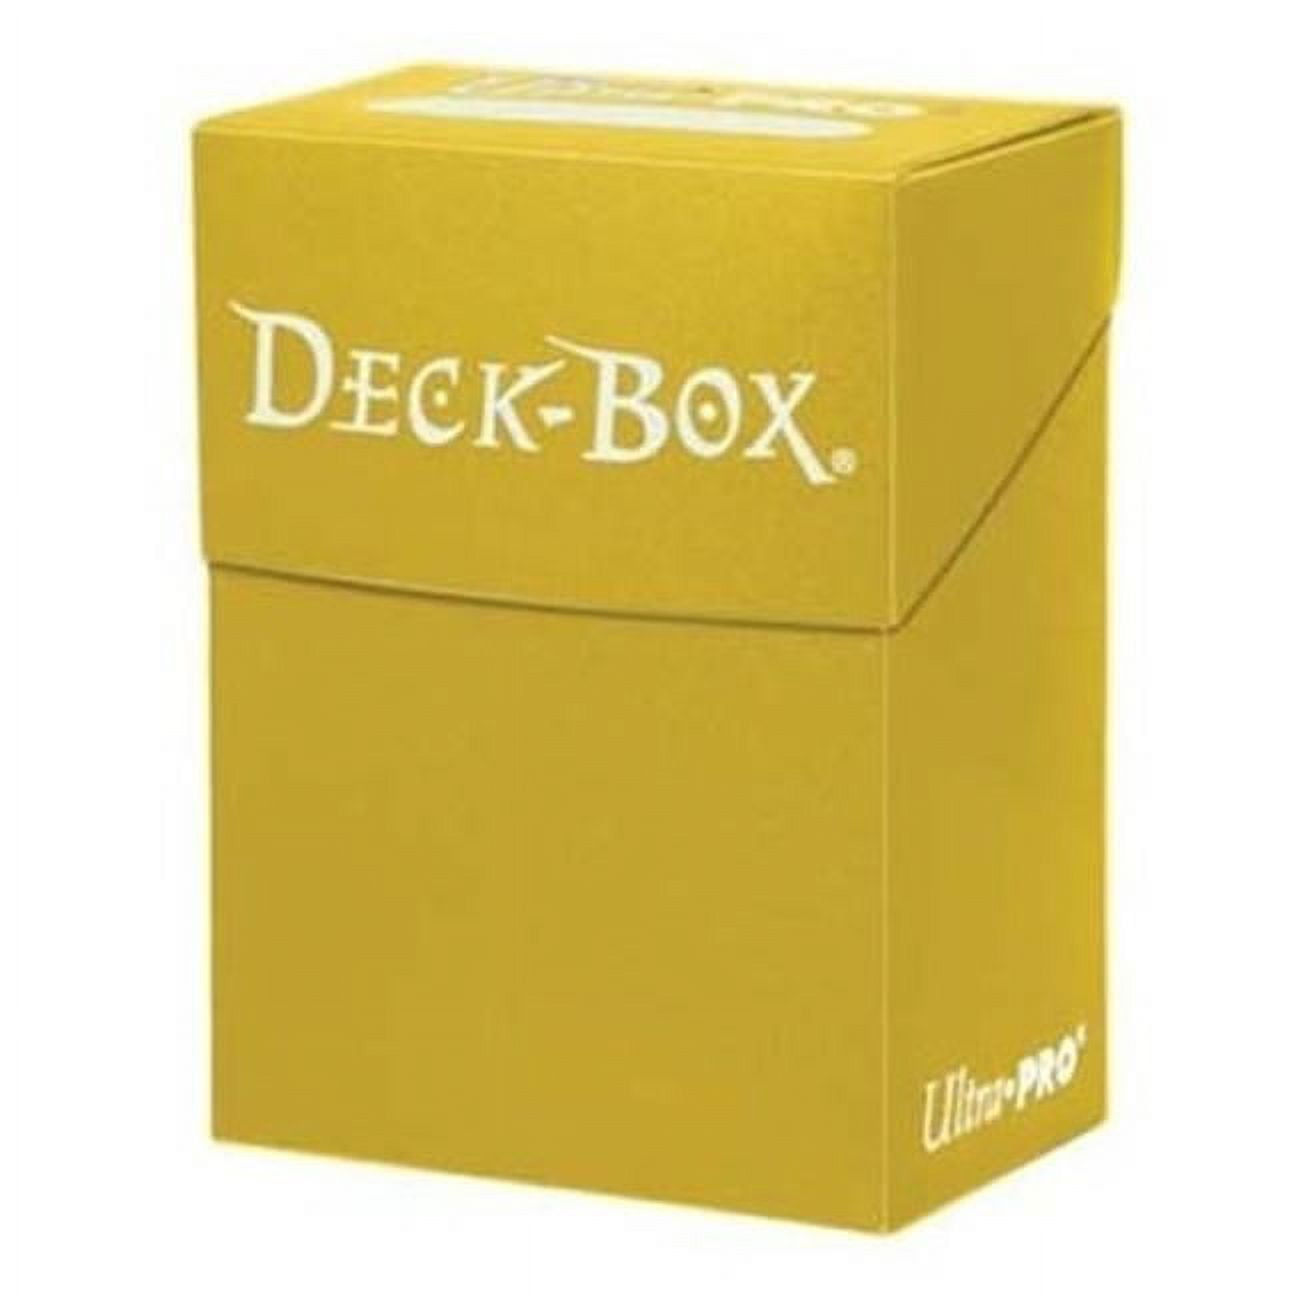 Ulp82476 Deck Protector Deck Box, Solid Yellow